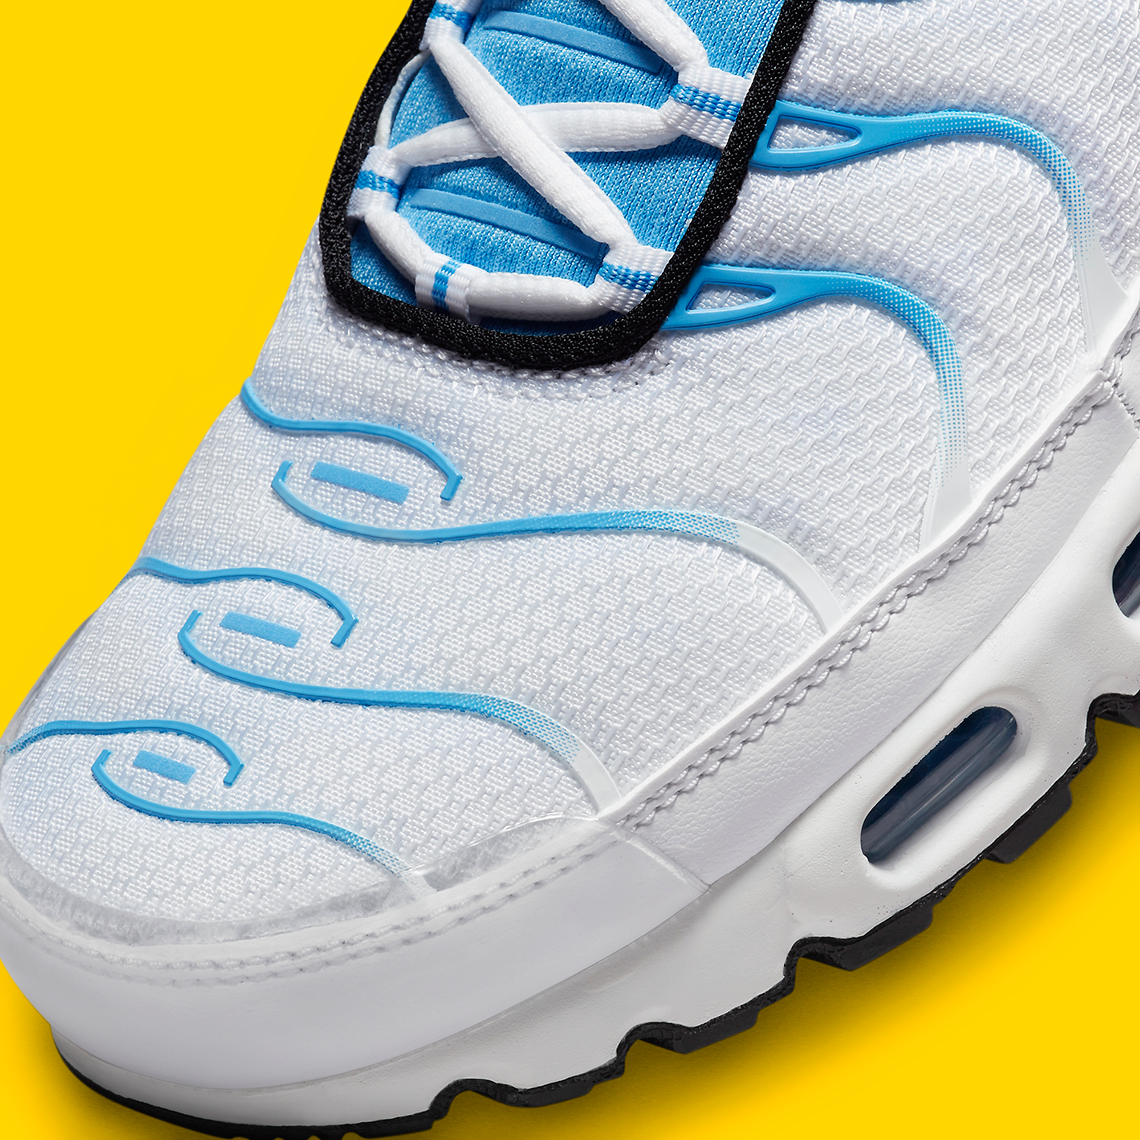 nike air max 2014 price in india today 2019 White University Blue Yellow Dm0032 101 5